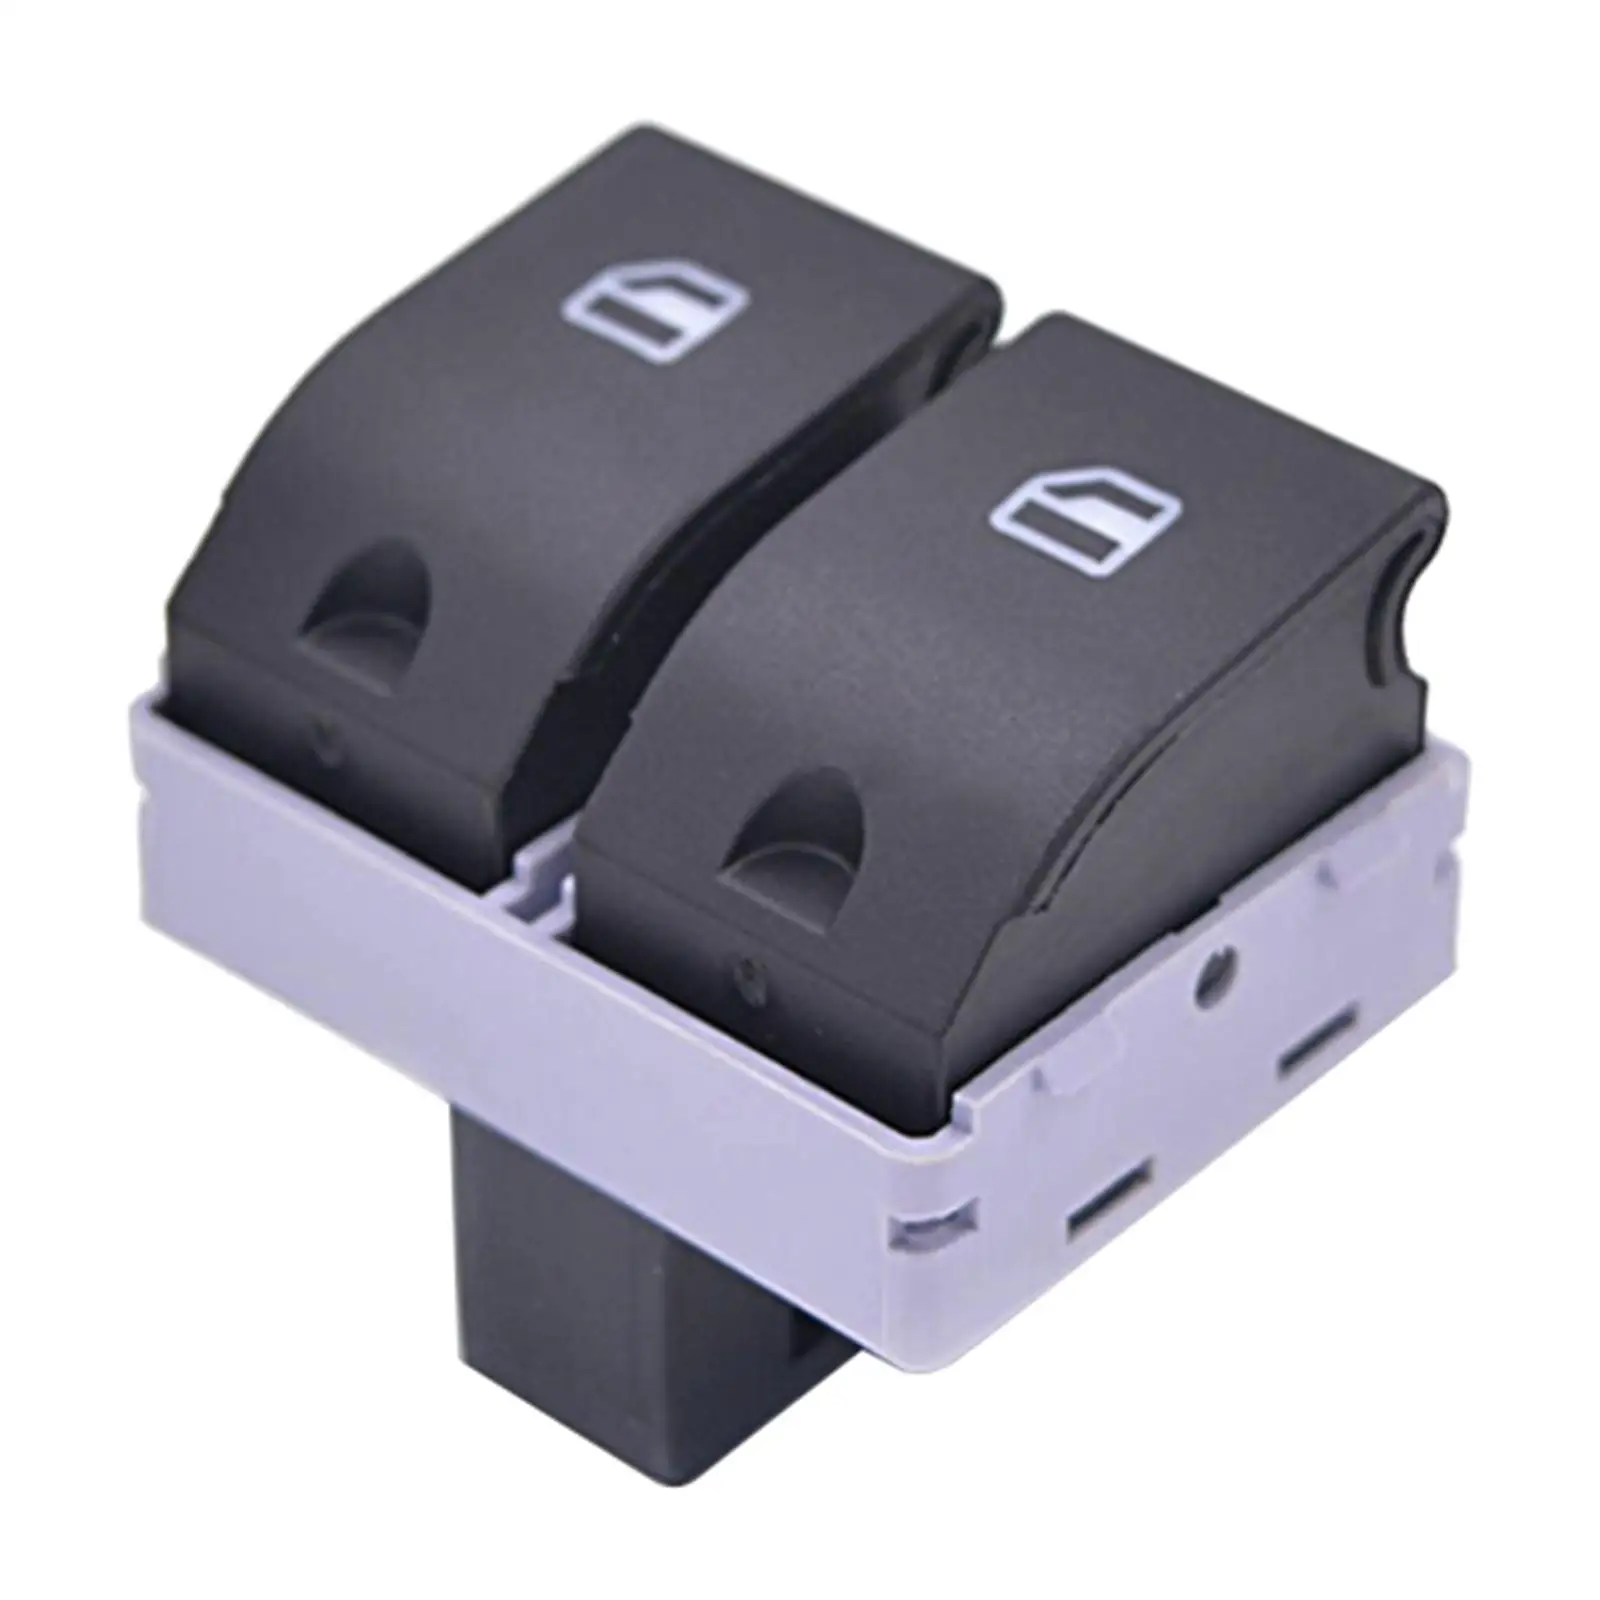 High Performance Driver's Door Window Switch for VW 9N Fox Seat Ibiza Cordoba 6Q0 959 858 02-10 Replacement